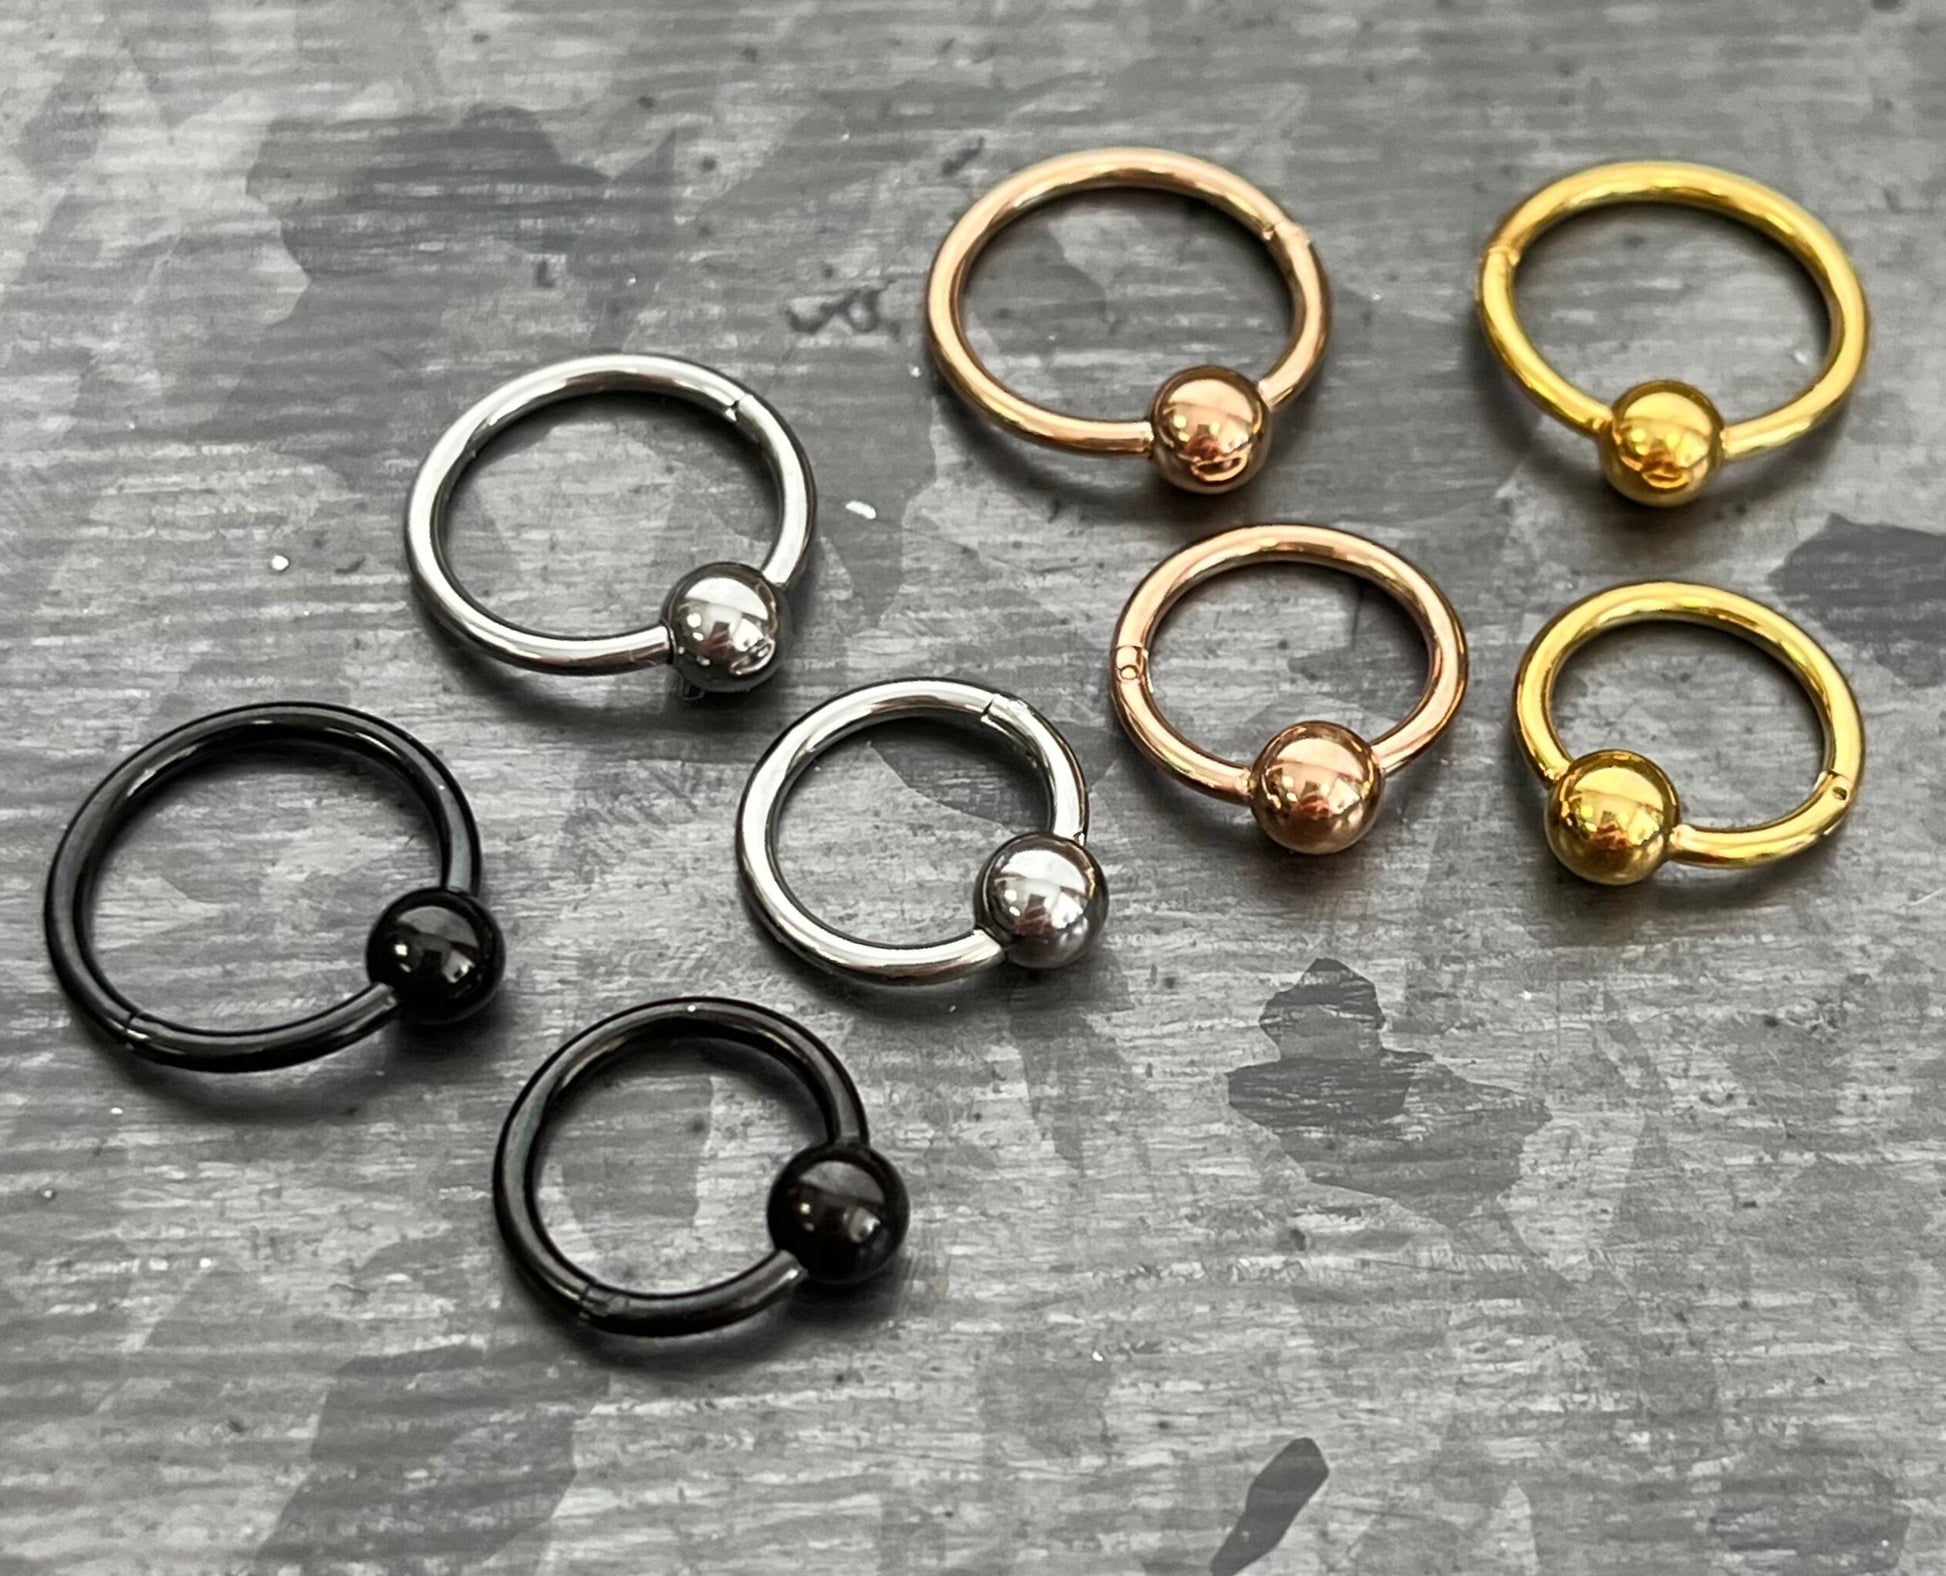 1 Piece Unique Stainless Steel Ball Hinged Segment Captive Ring -16g - Diameter 10mm or 8mm - Black, Gold, Rose Gold & Silver Available!